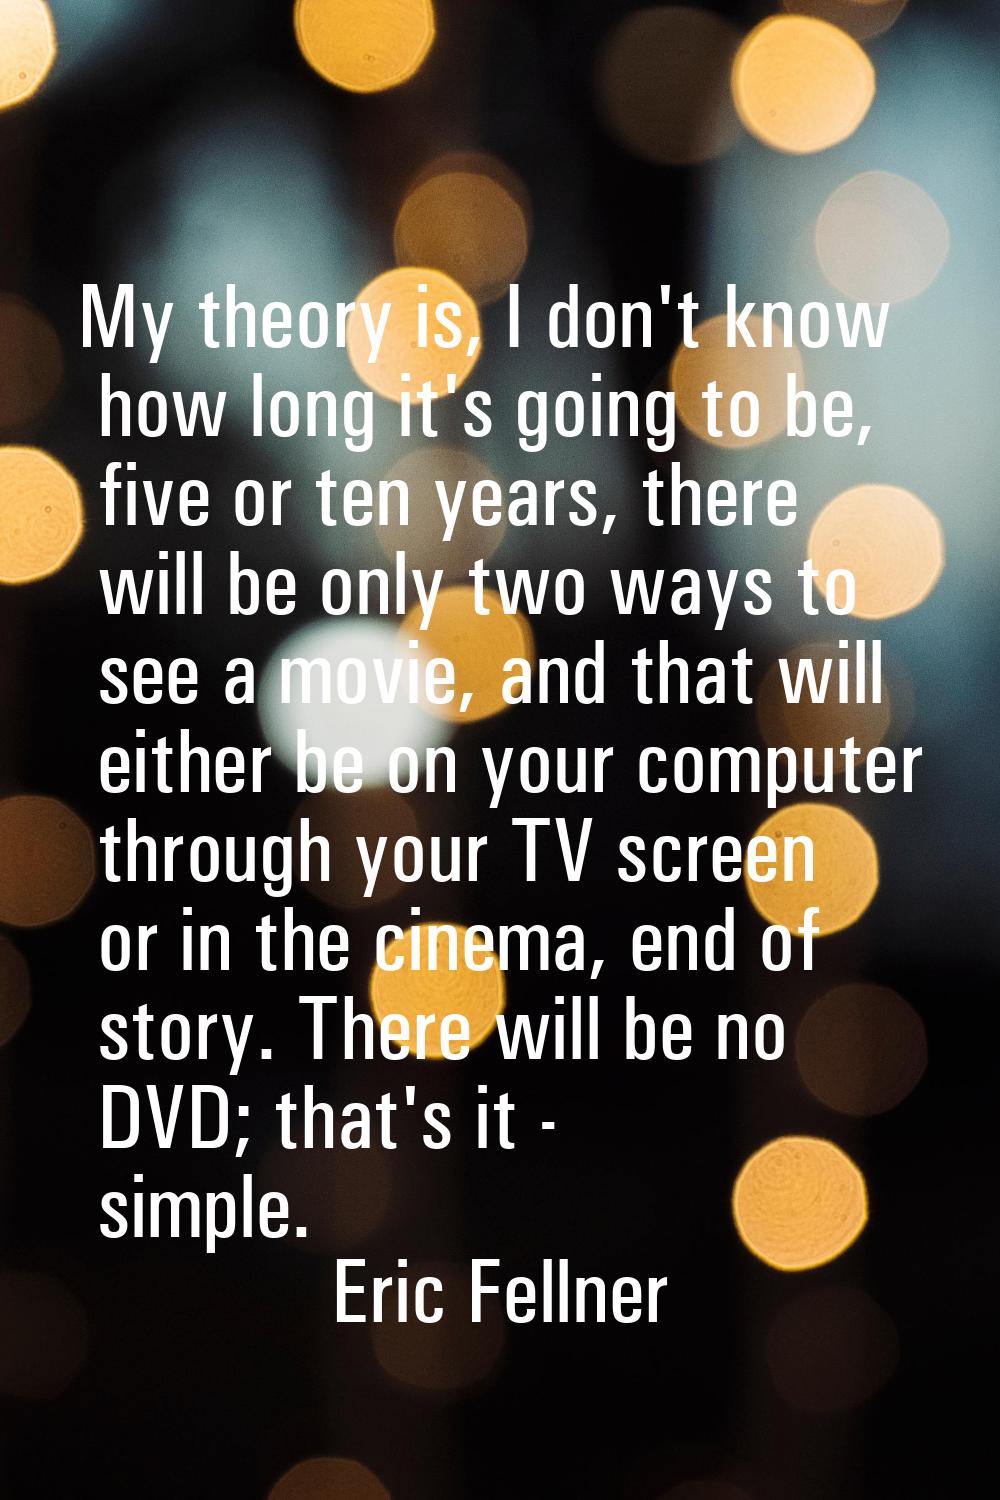 My theory is, I don't know how long it's going to be, five or ten years, there will be only two way